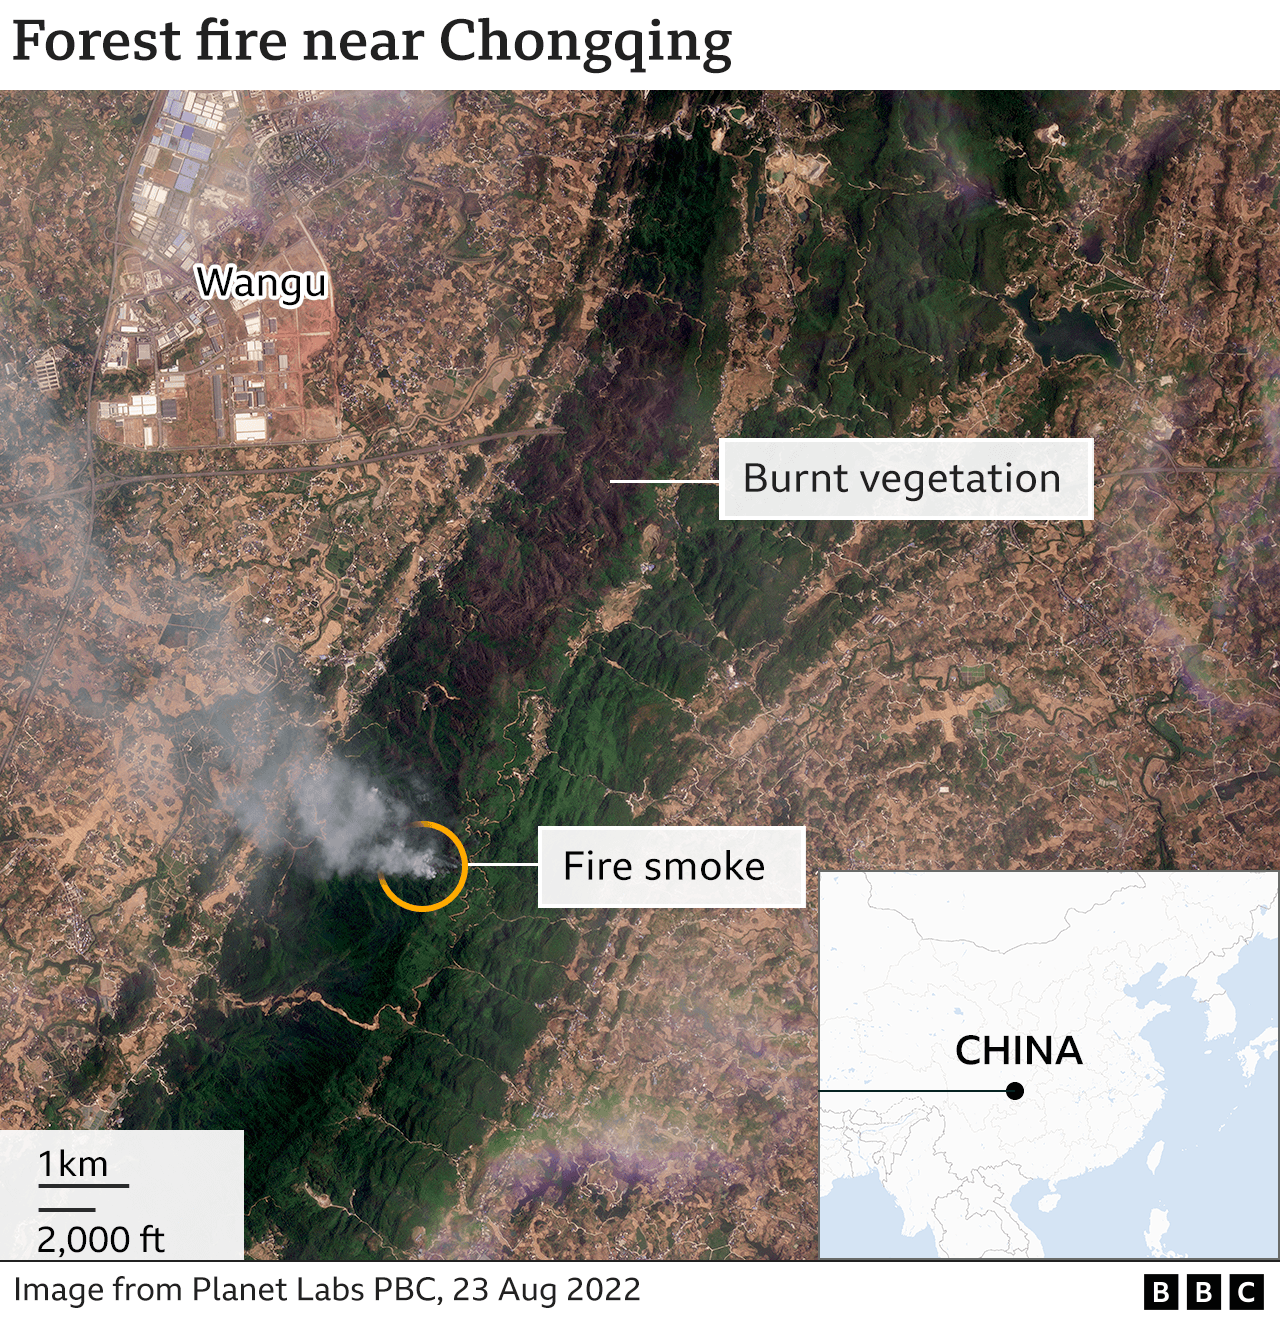 Satellite image shows scars of forest fire near Chongqing